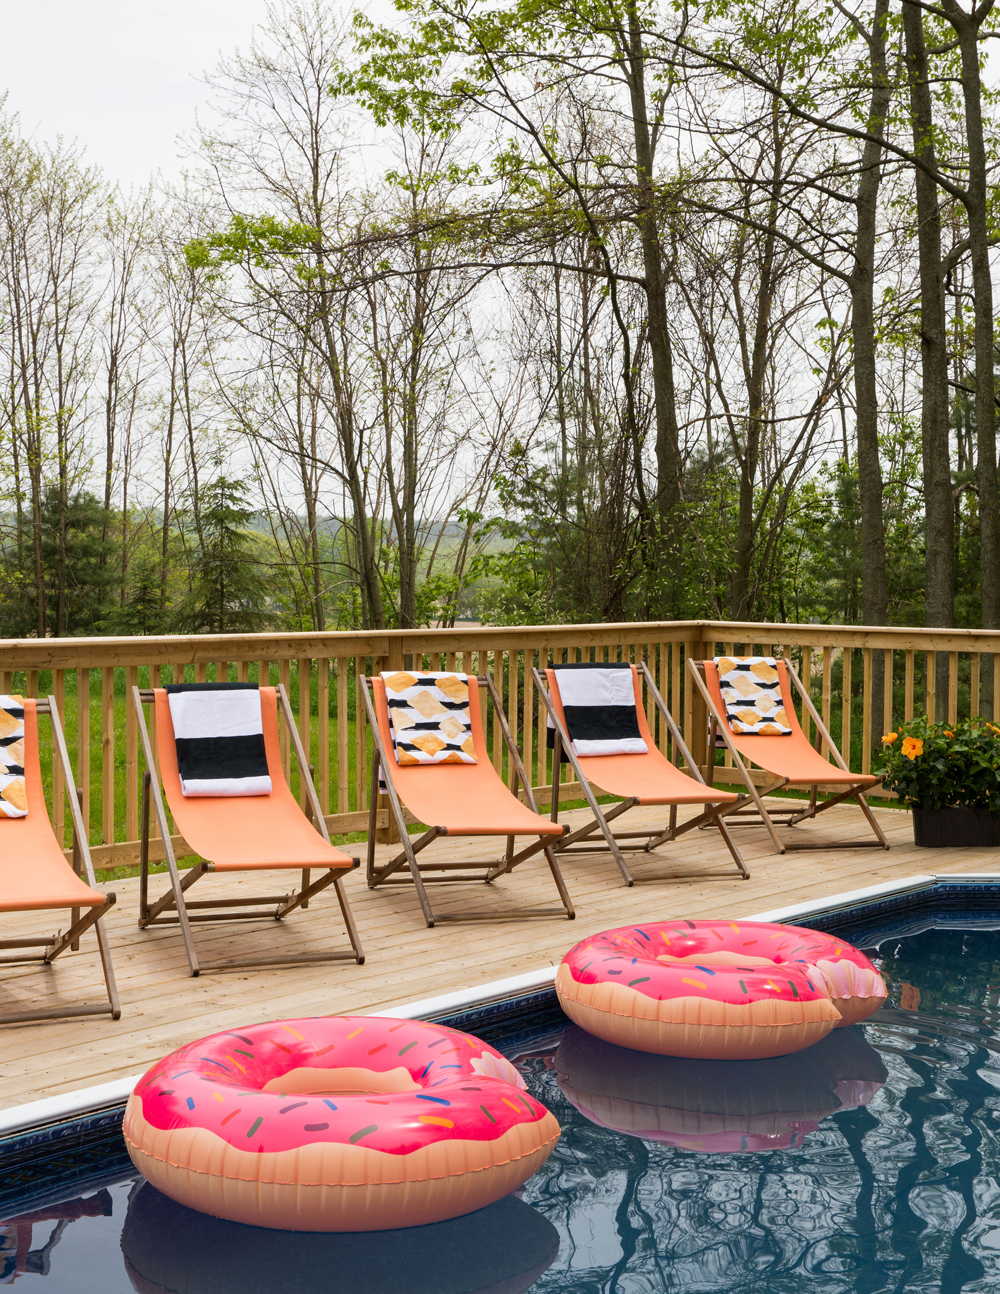 Coral sling chairs poolside with donut-shaped floating devices in the water